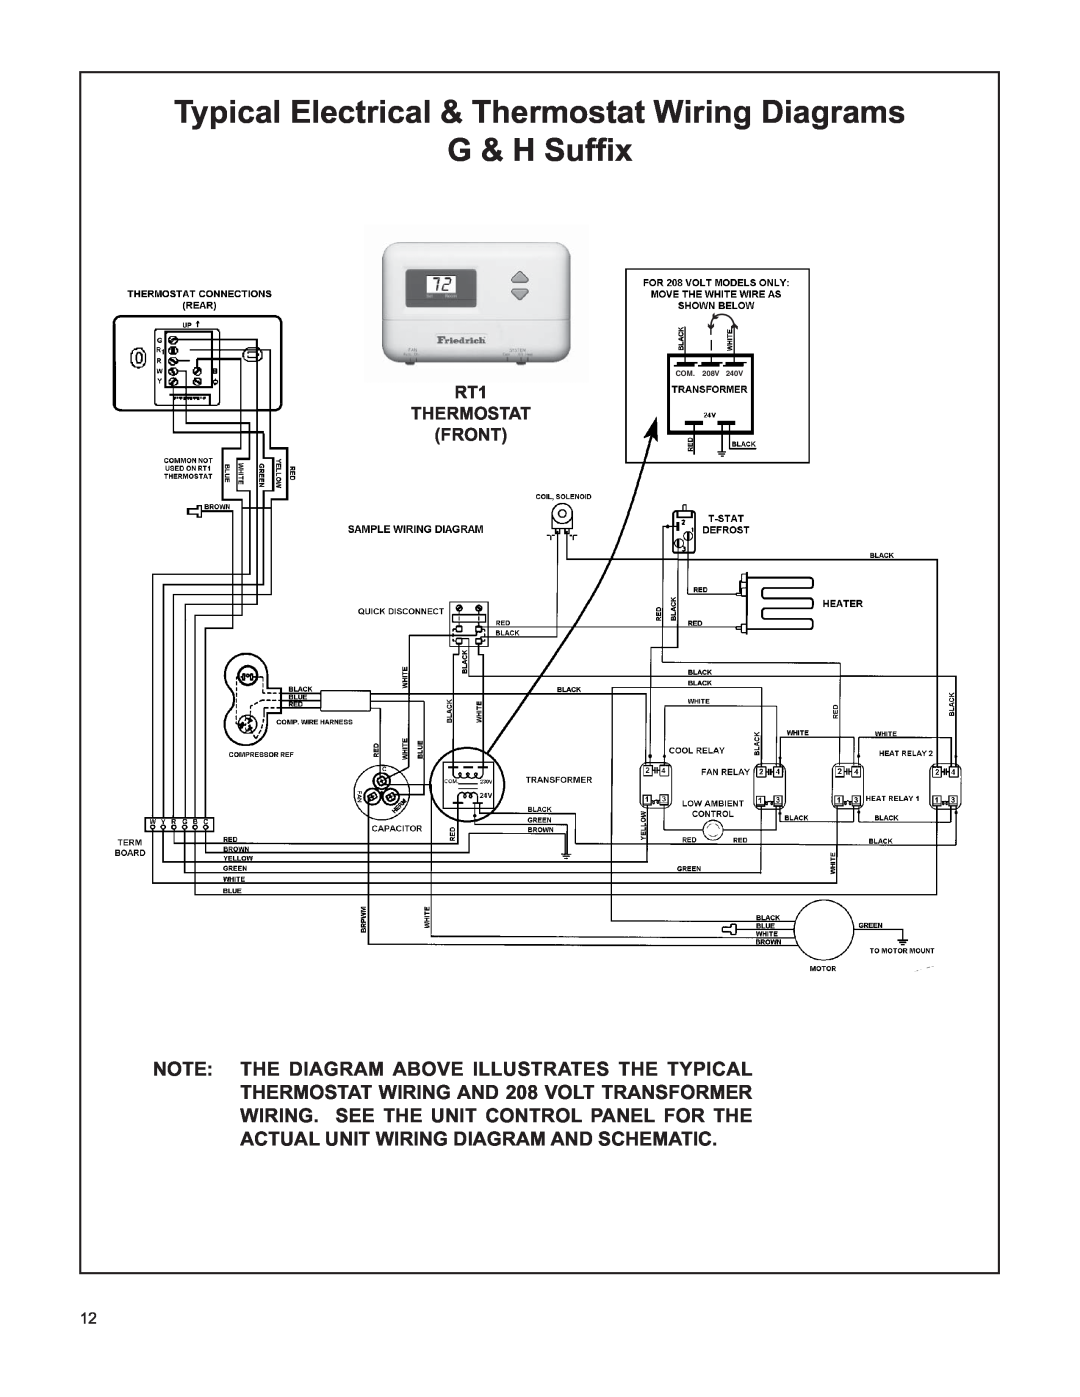 Friedrich H)A09K25, V(E G & H Sufﬁx, Typical Electrical & Thermostat Wiring Diagrams, RT1 THERMOSTAT FRONT, Com 